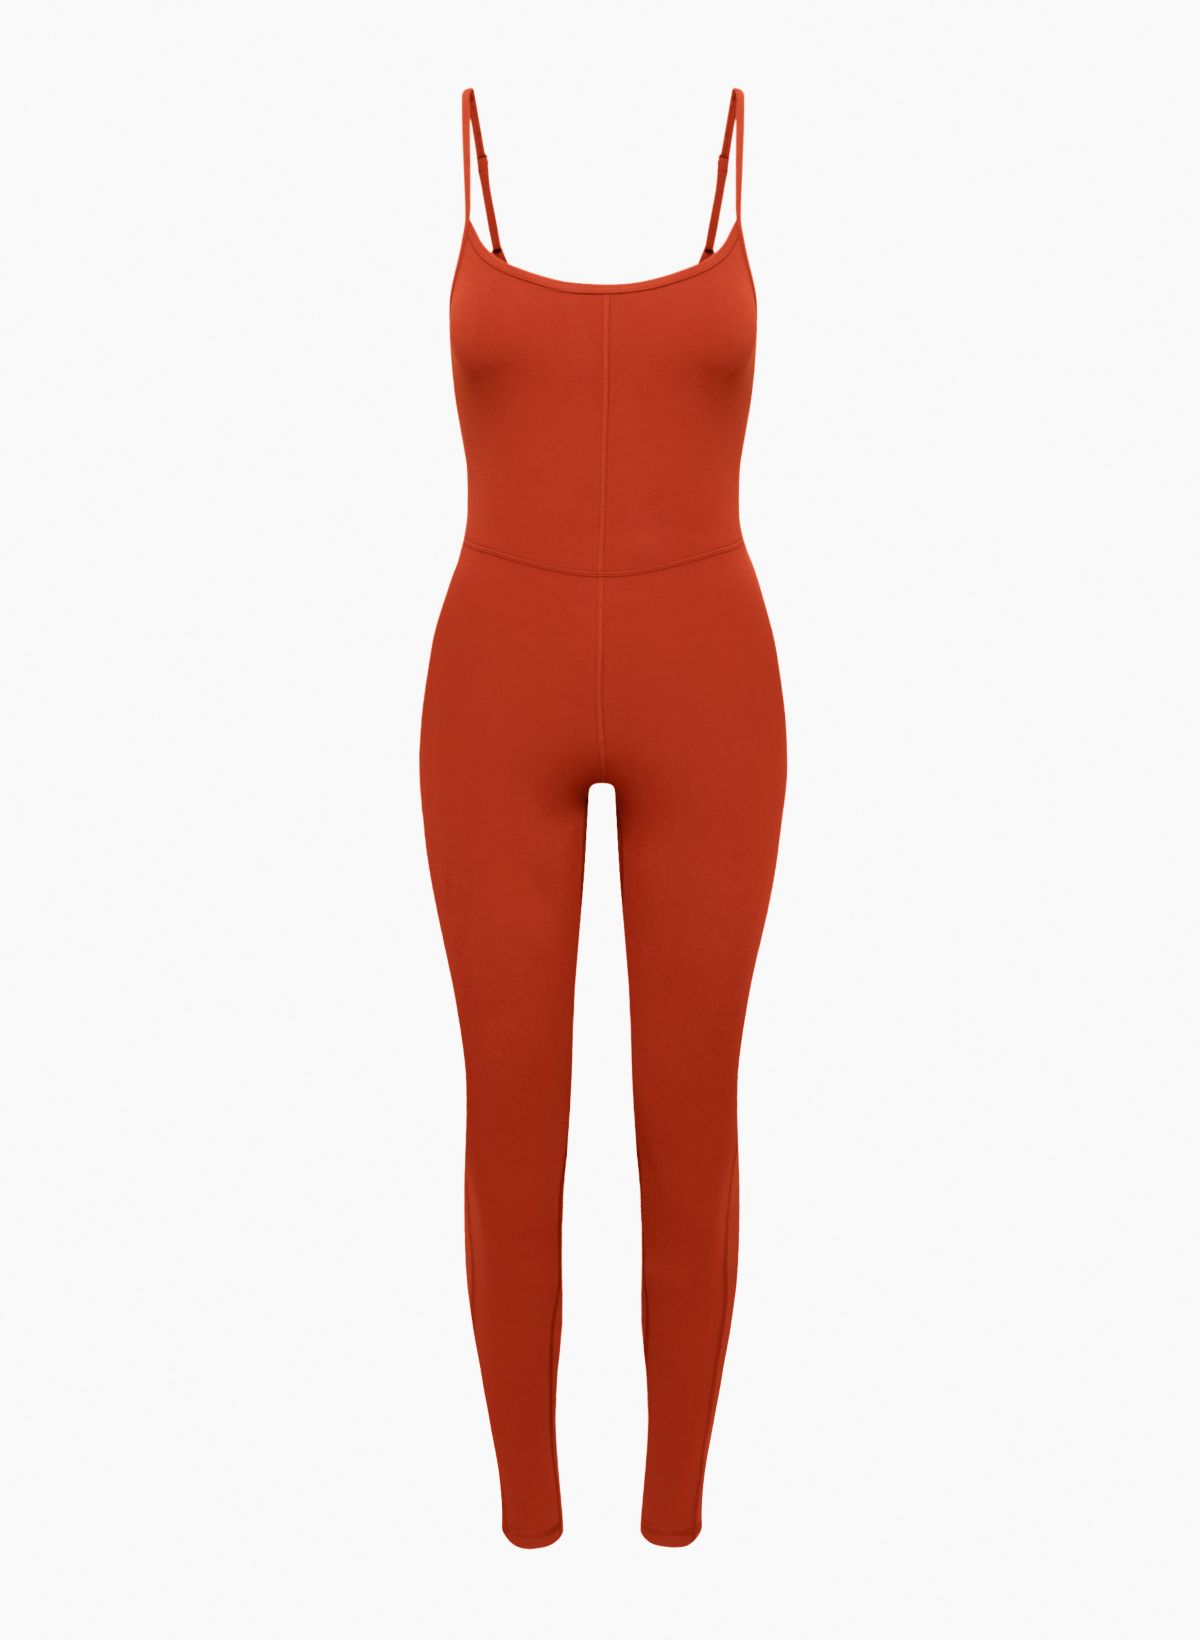 Wilfred Free DIVINITY JUMPSUIT